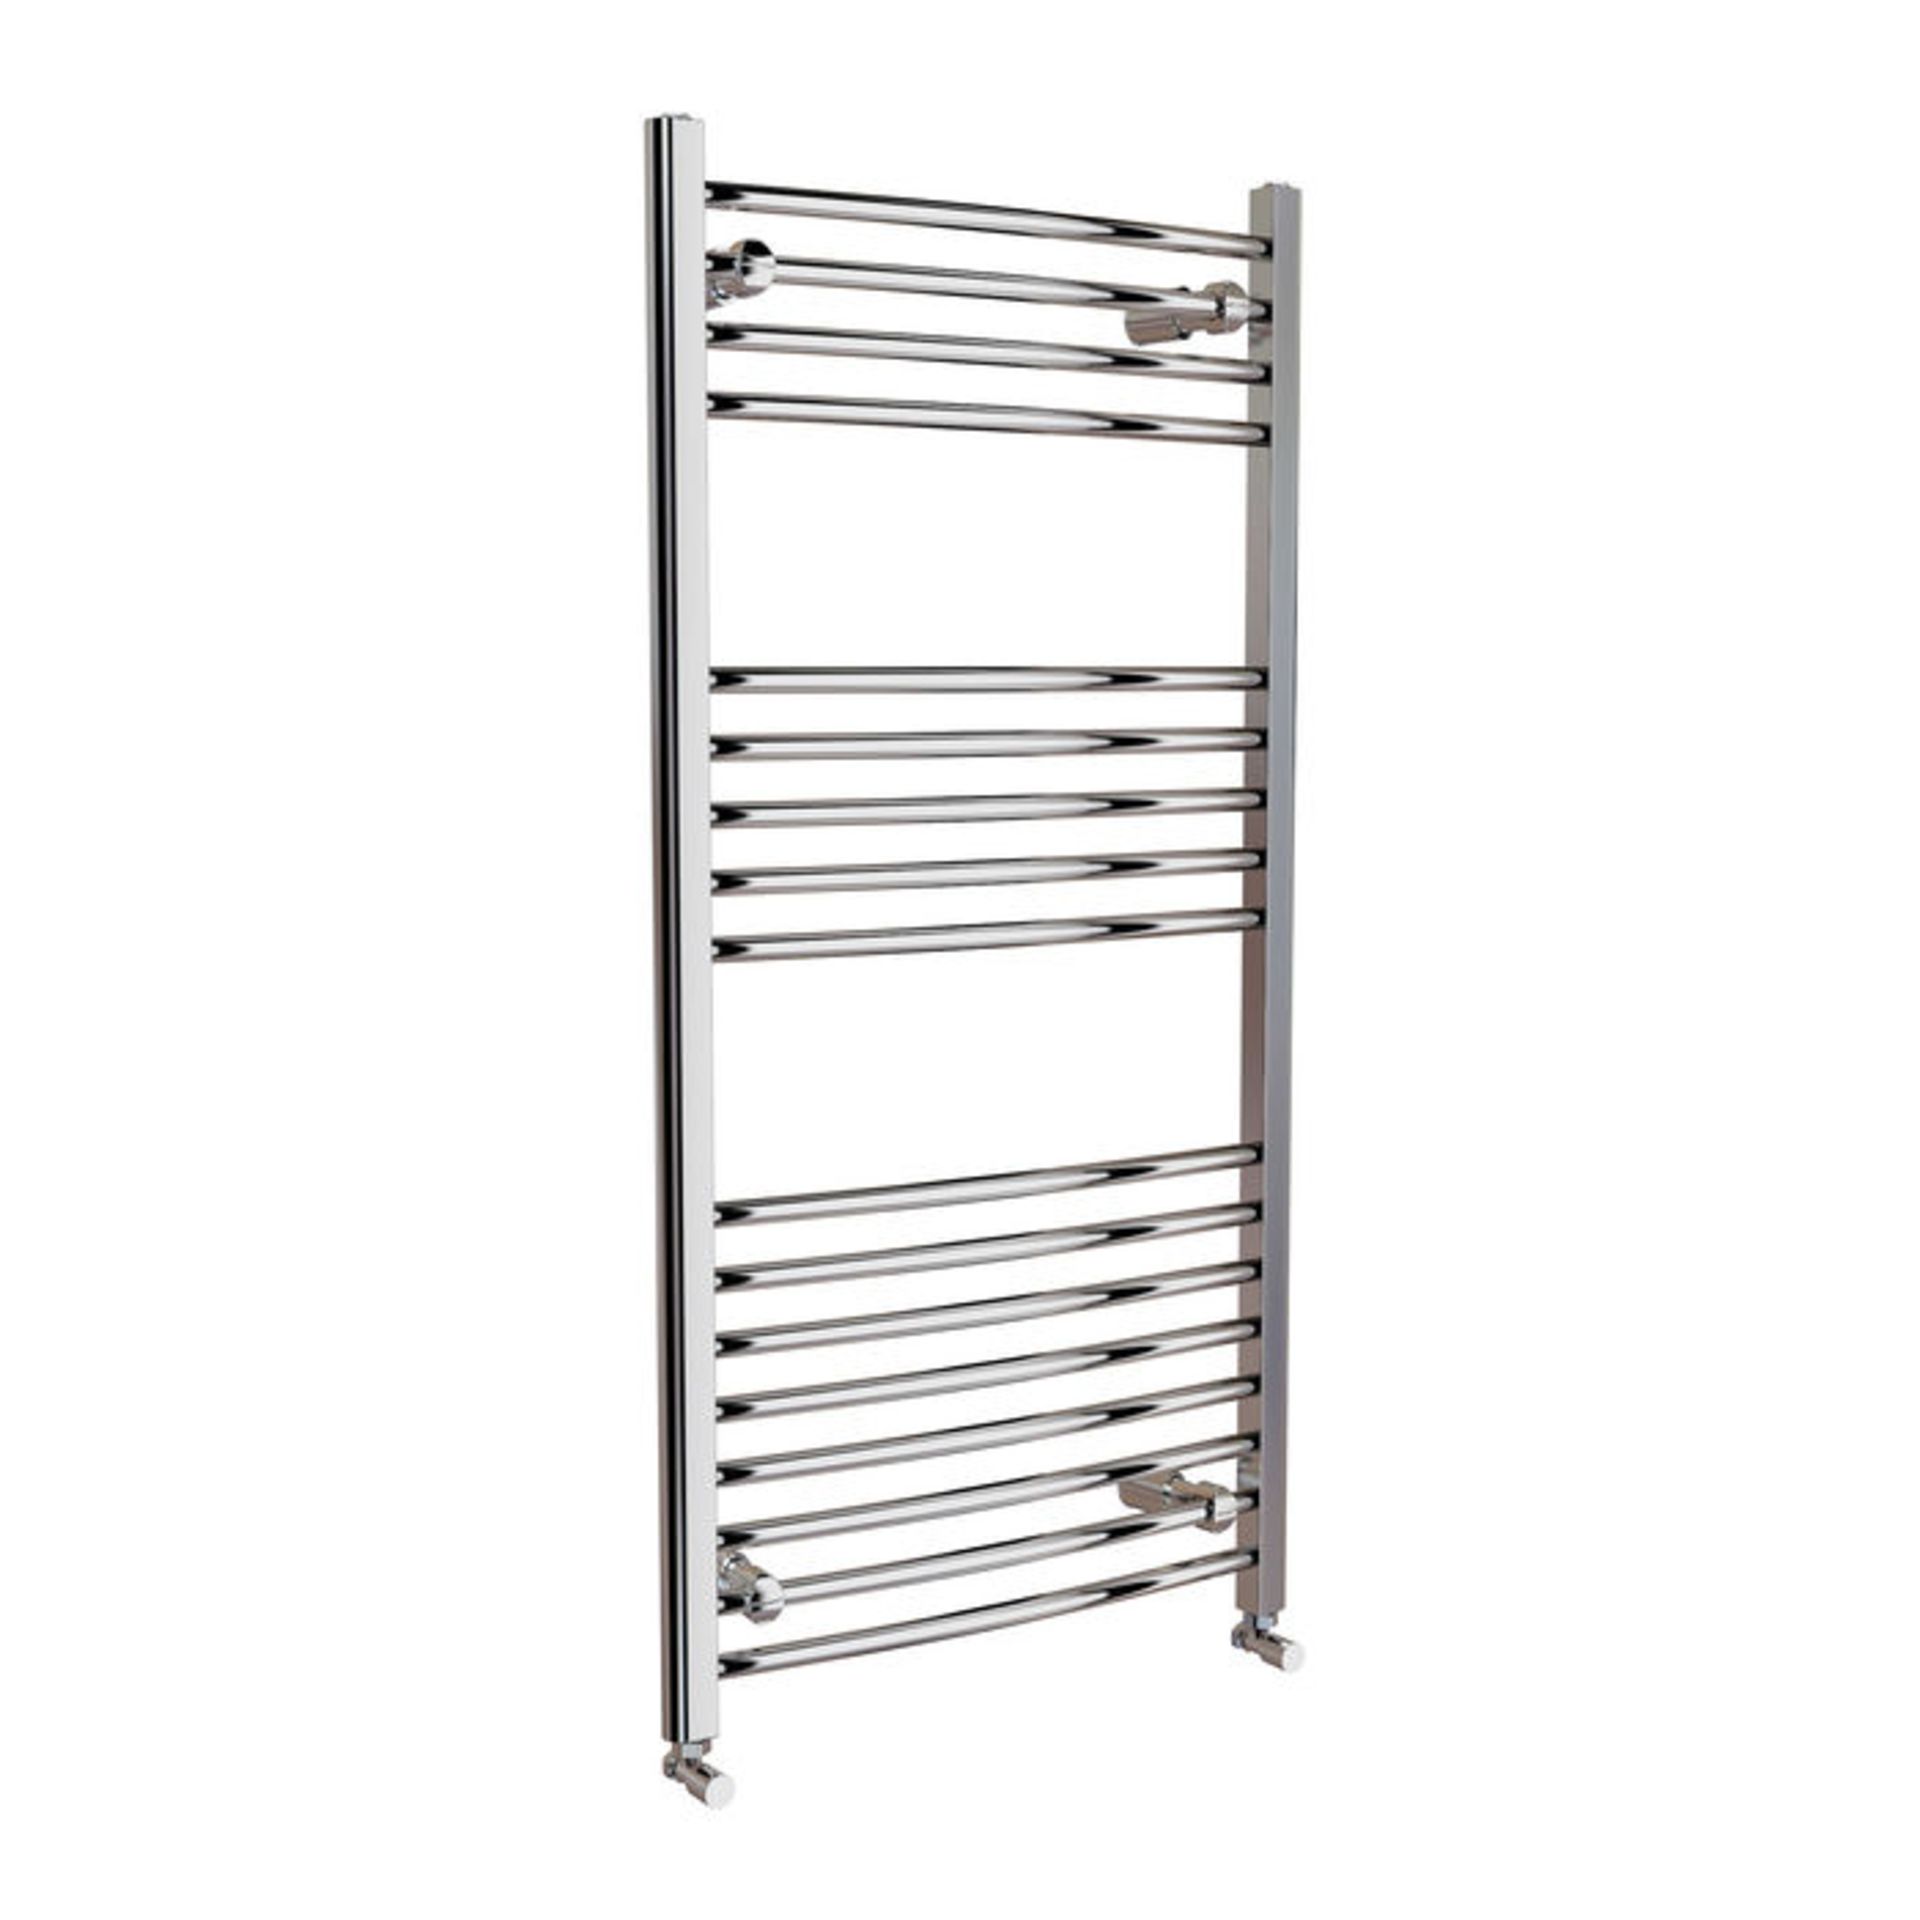 (TS252) 1200x600mm - 20mm Tubes - Chrome Curved Rail Ladder Towel Radiator. Made from chrome - Image 4 of 4